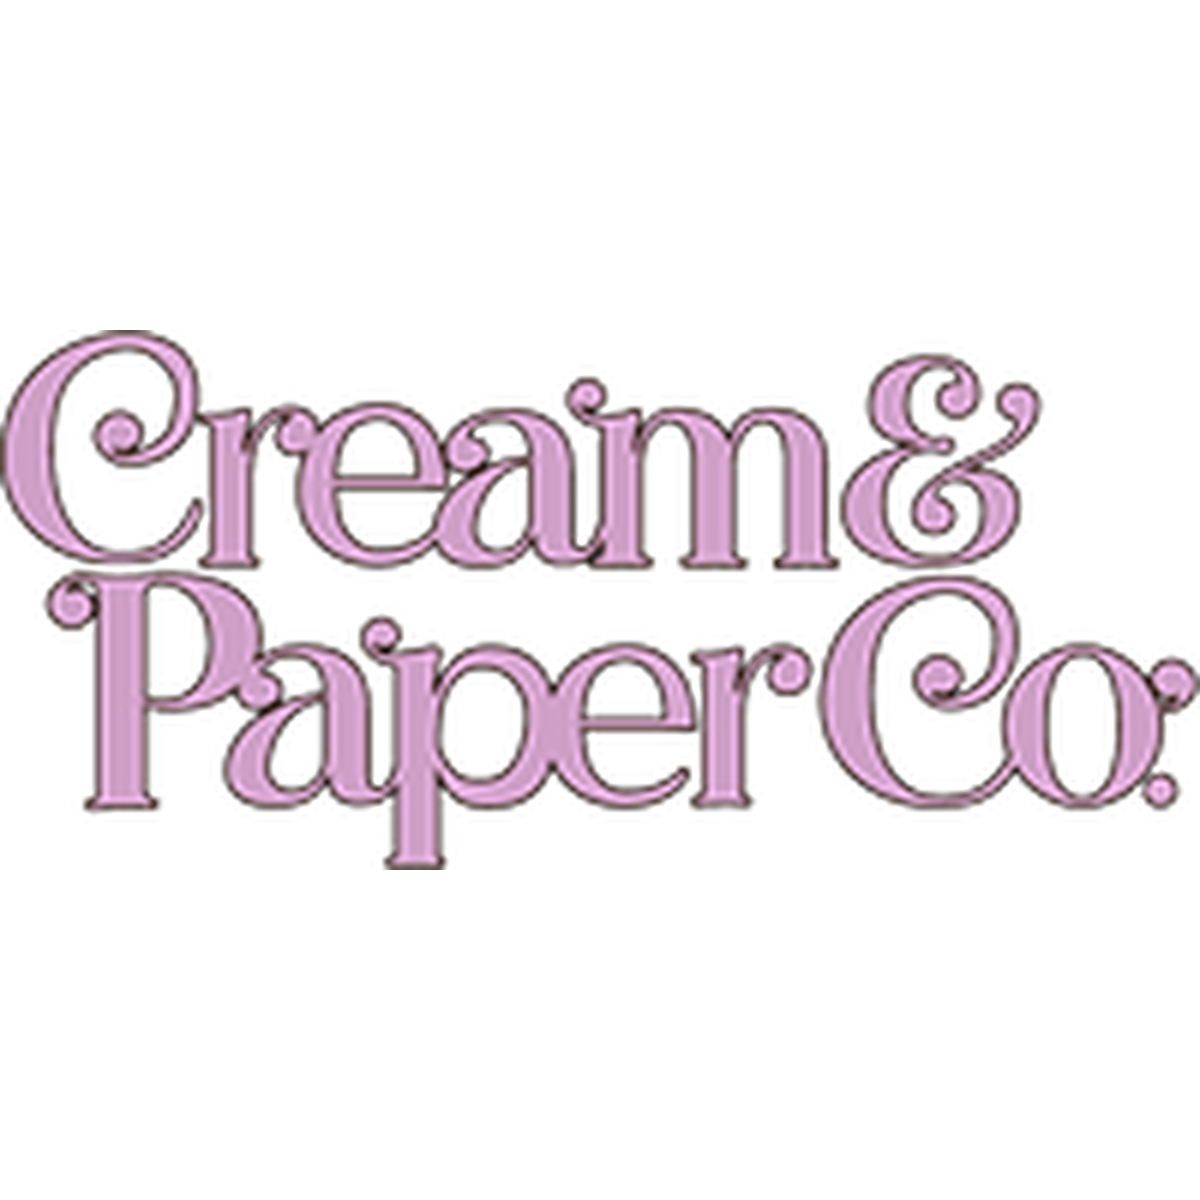 About Cream Paper Co